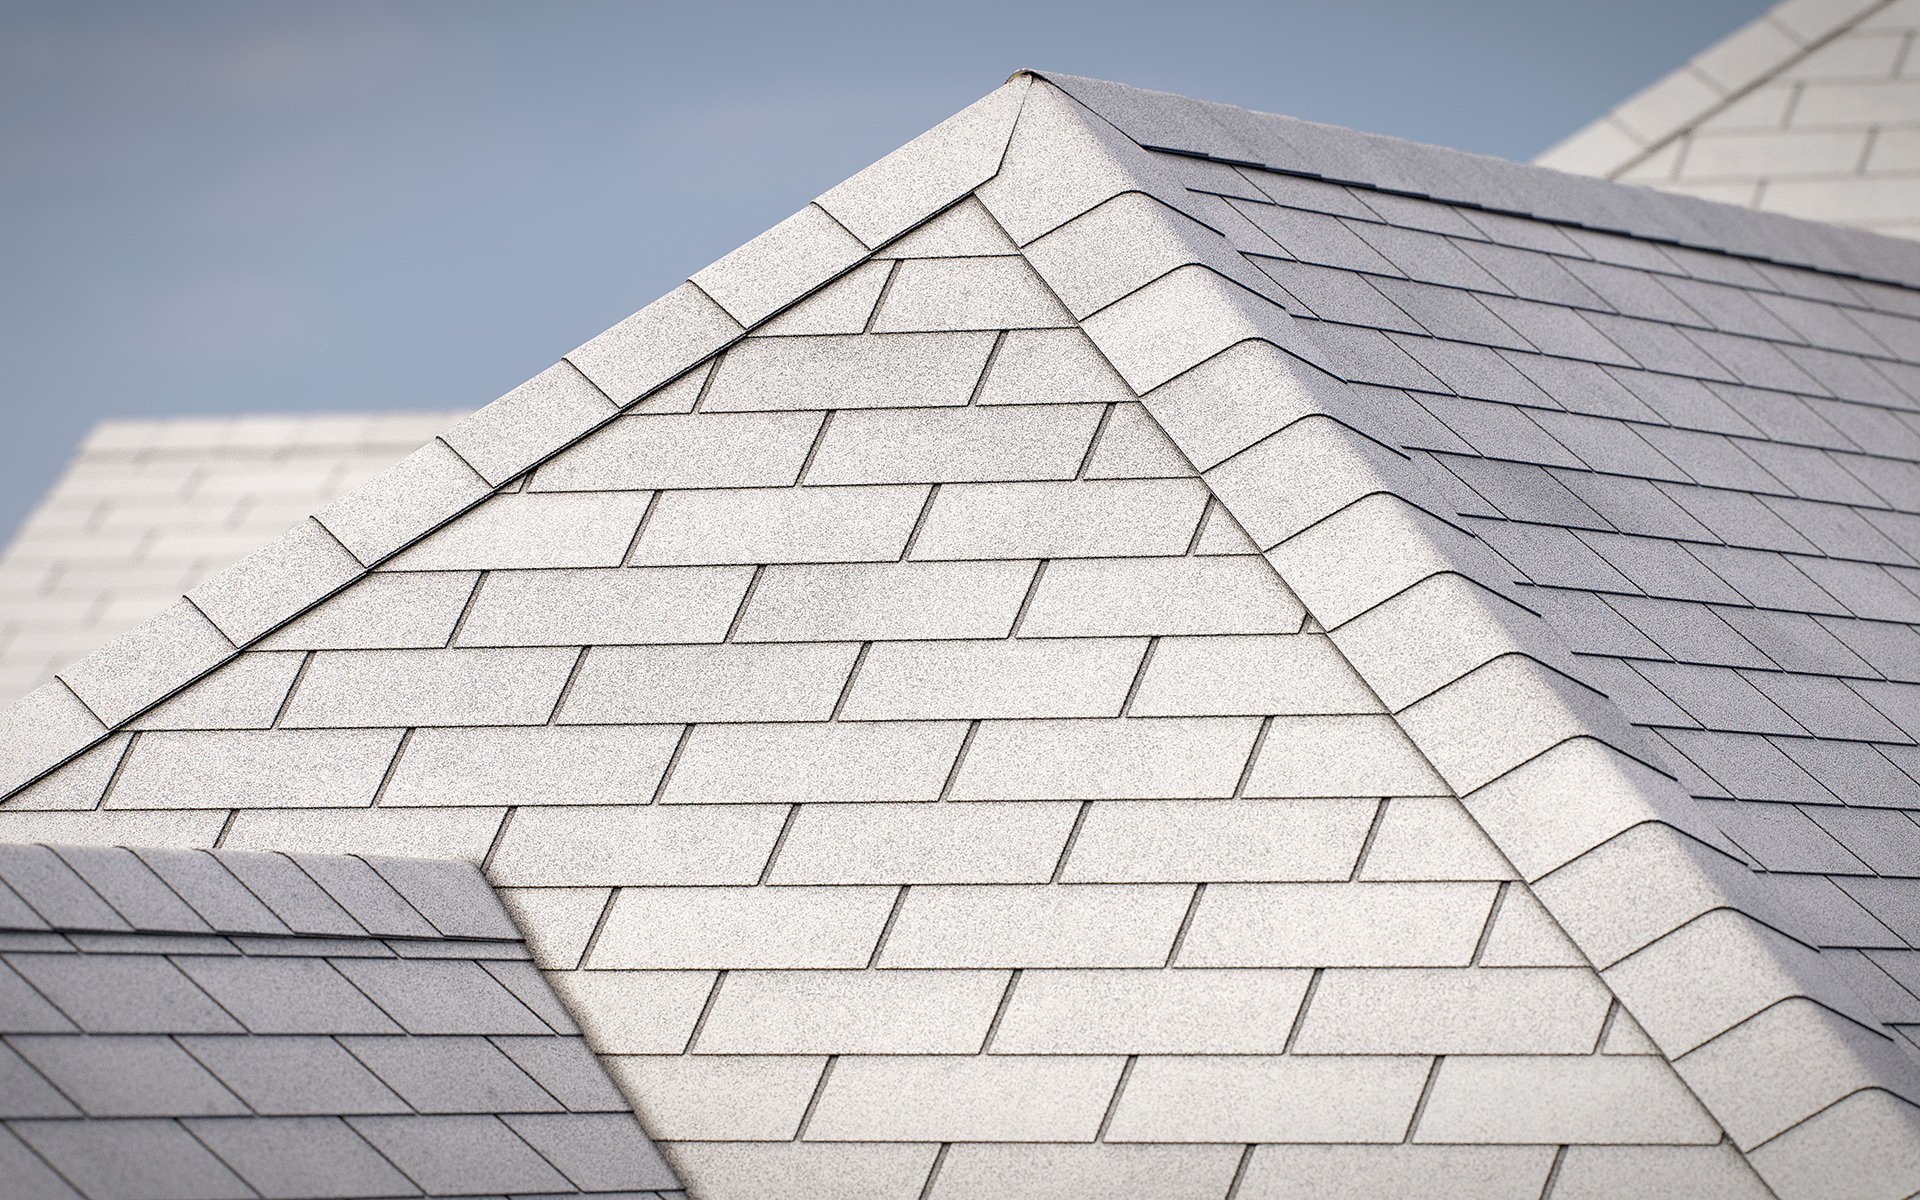 3-tab asphalt roof shingles white2 color 3D model preset for 3dsmax and RailClone. Rendered with vray, made for arch-viz.